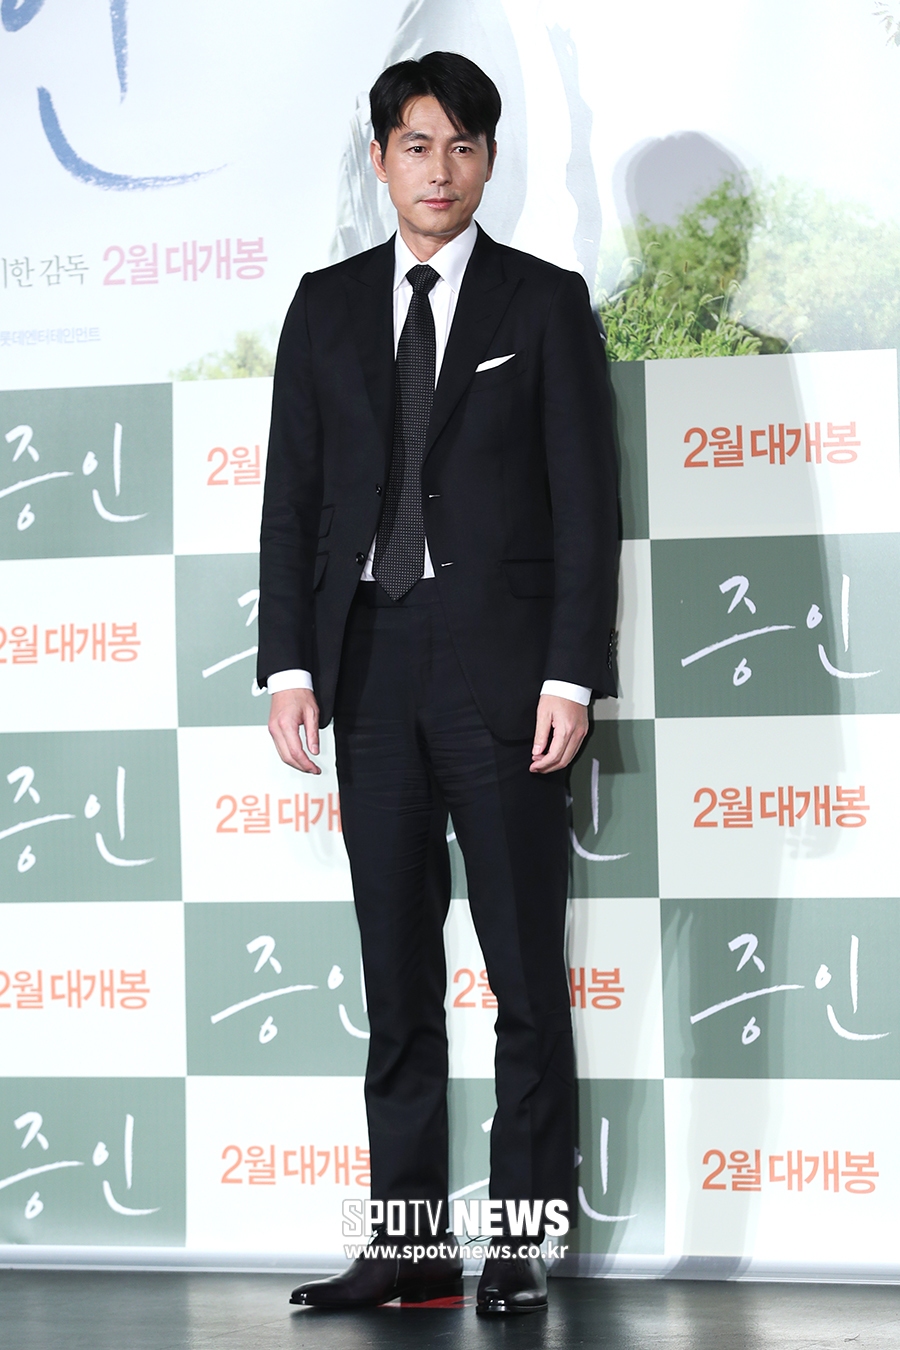 The movie Witness production meeting was held at the entrance of the Lotte Cinema Counter in Jayang-dong, Gwangjin-gu, Seoul on the afternoon of the 10th. Actor Jung Woo-sung poses.